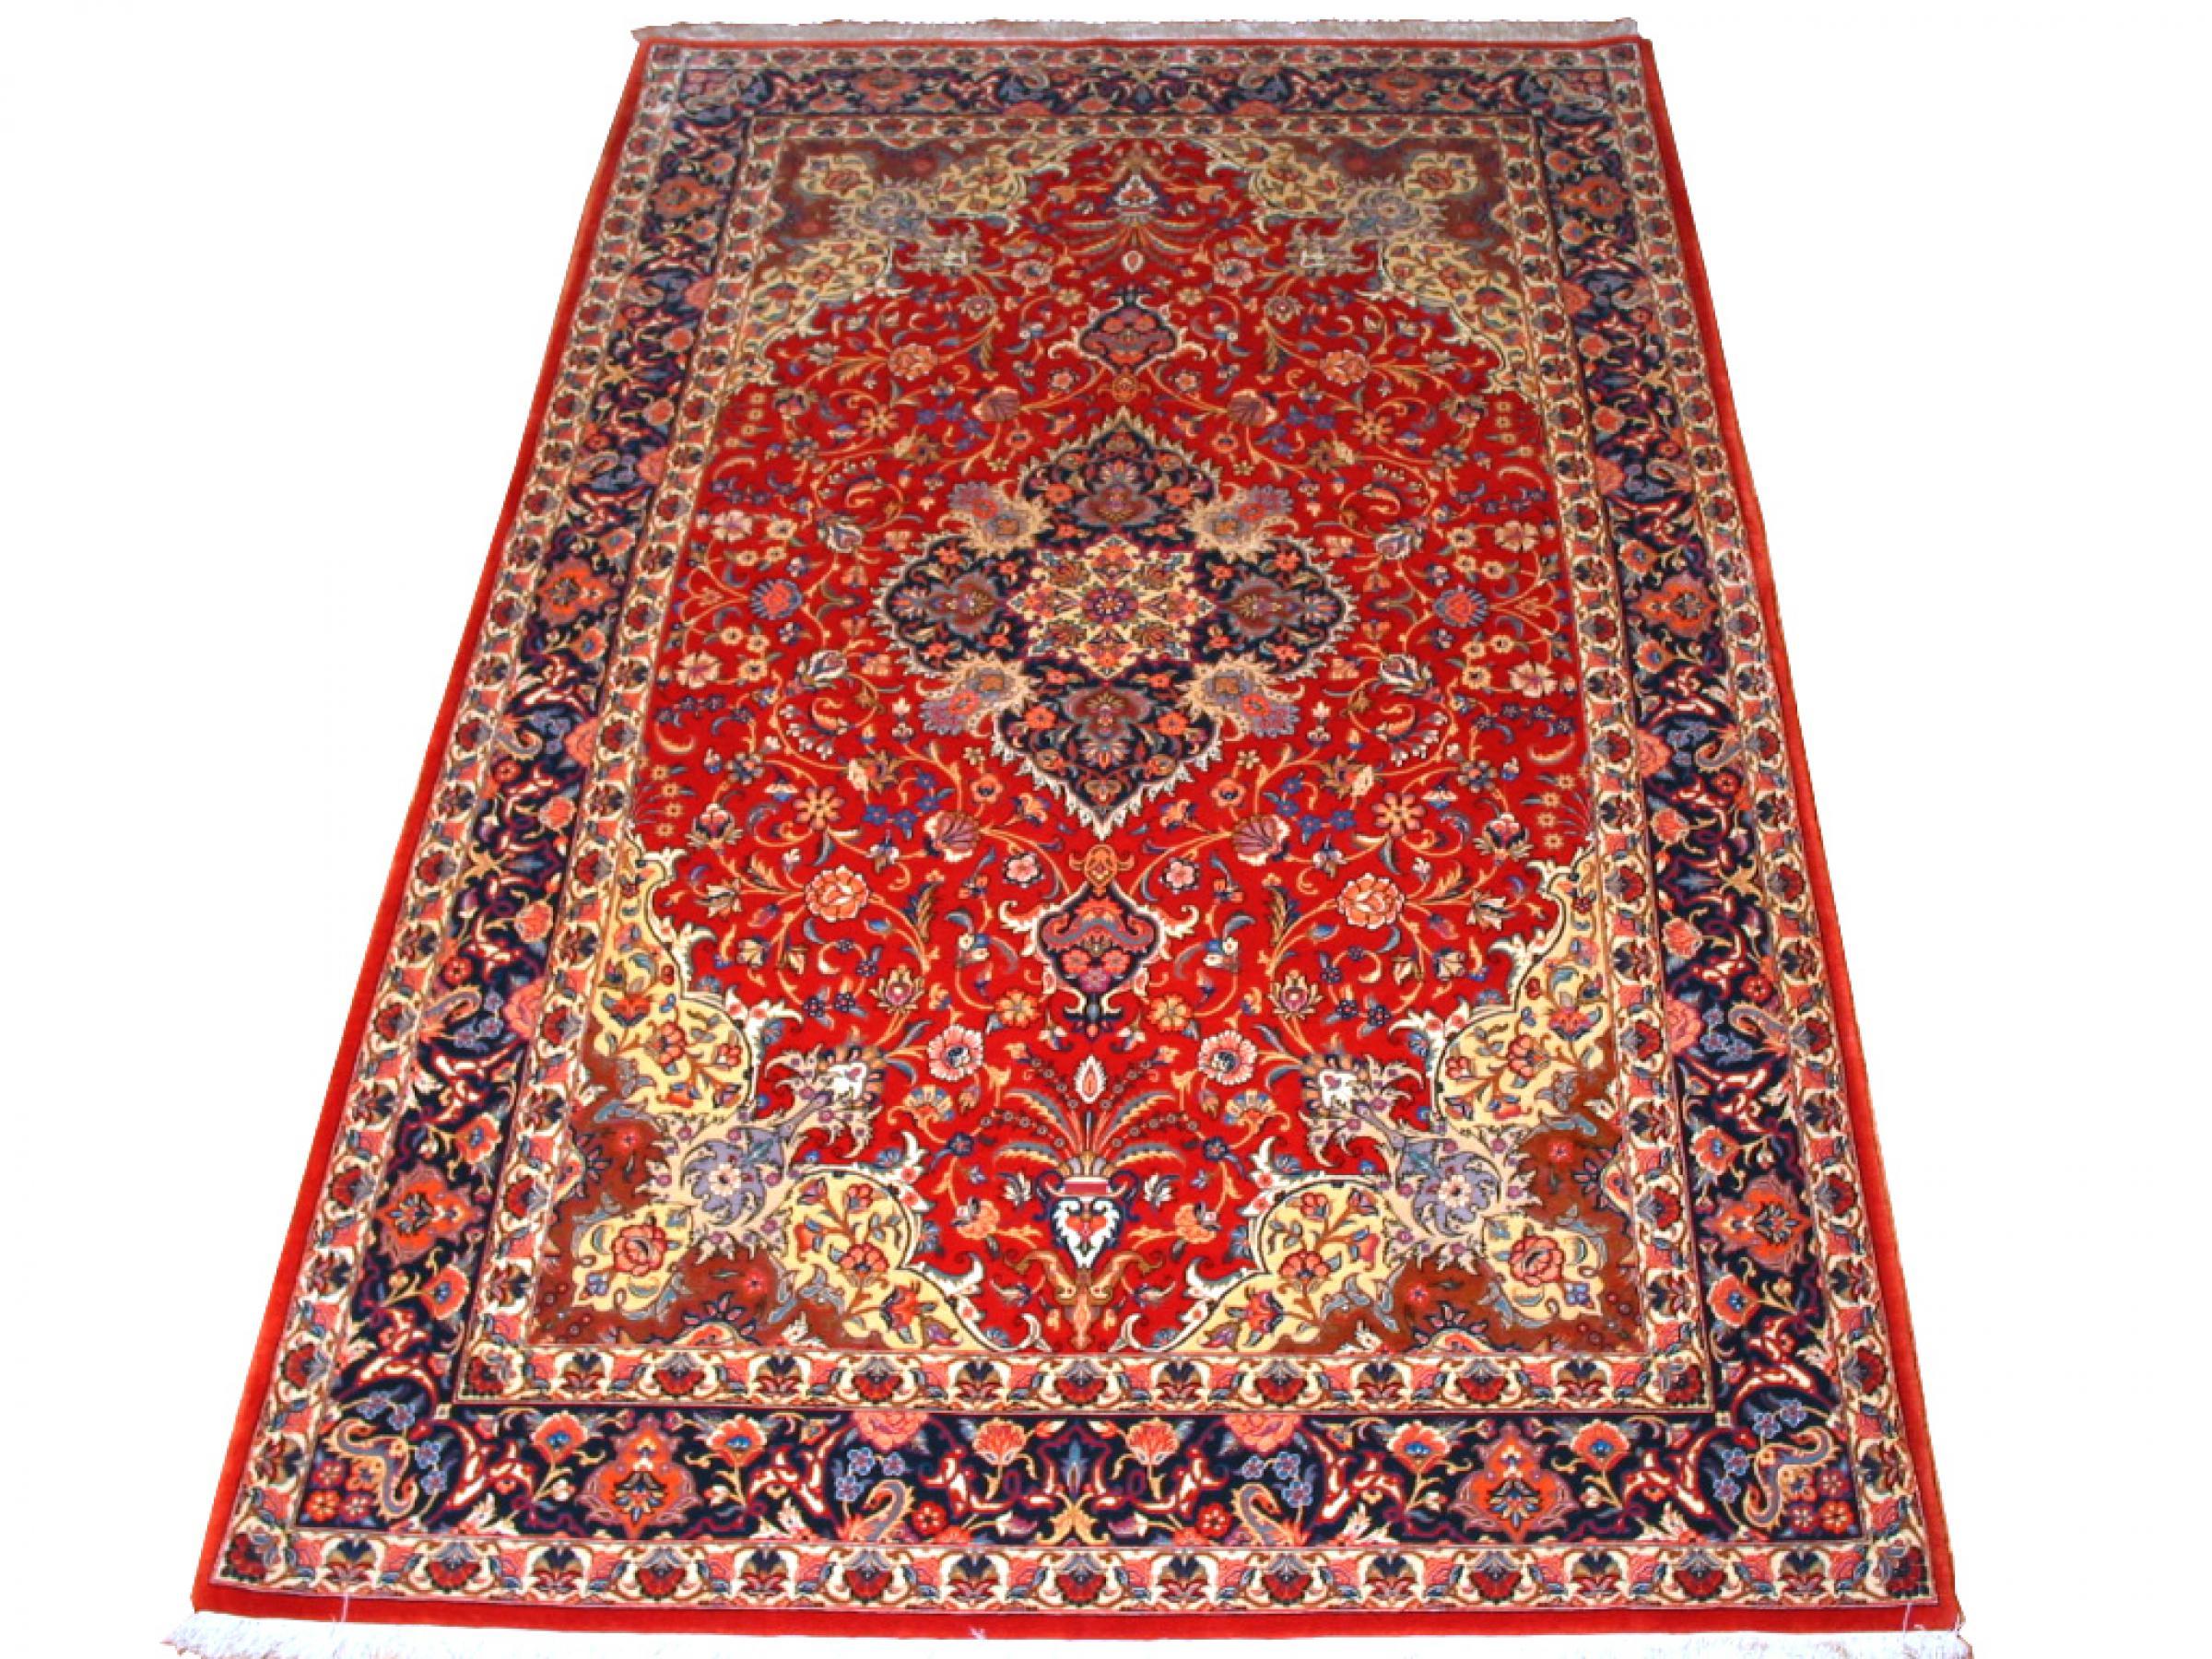 A stunning Persian rug, Isfahan silk warp, 20th century. 

It can't get any better in quality and reputation than that of this Isfahan. This type of rugs counts among the finest and most beautiful types of oriental rugs. It comes with an